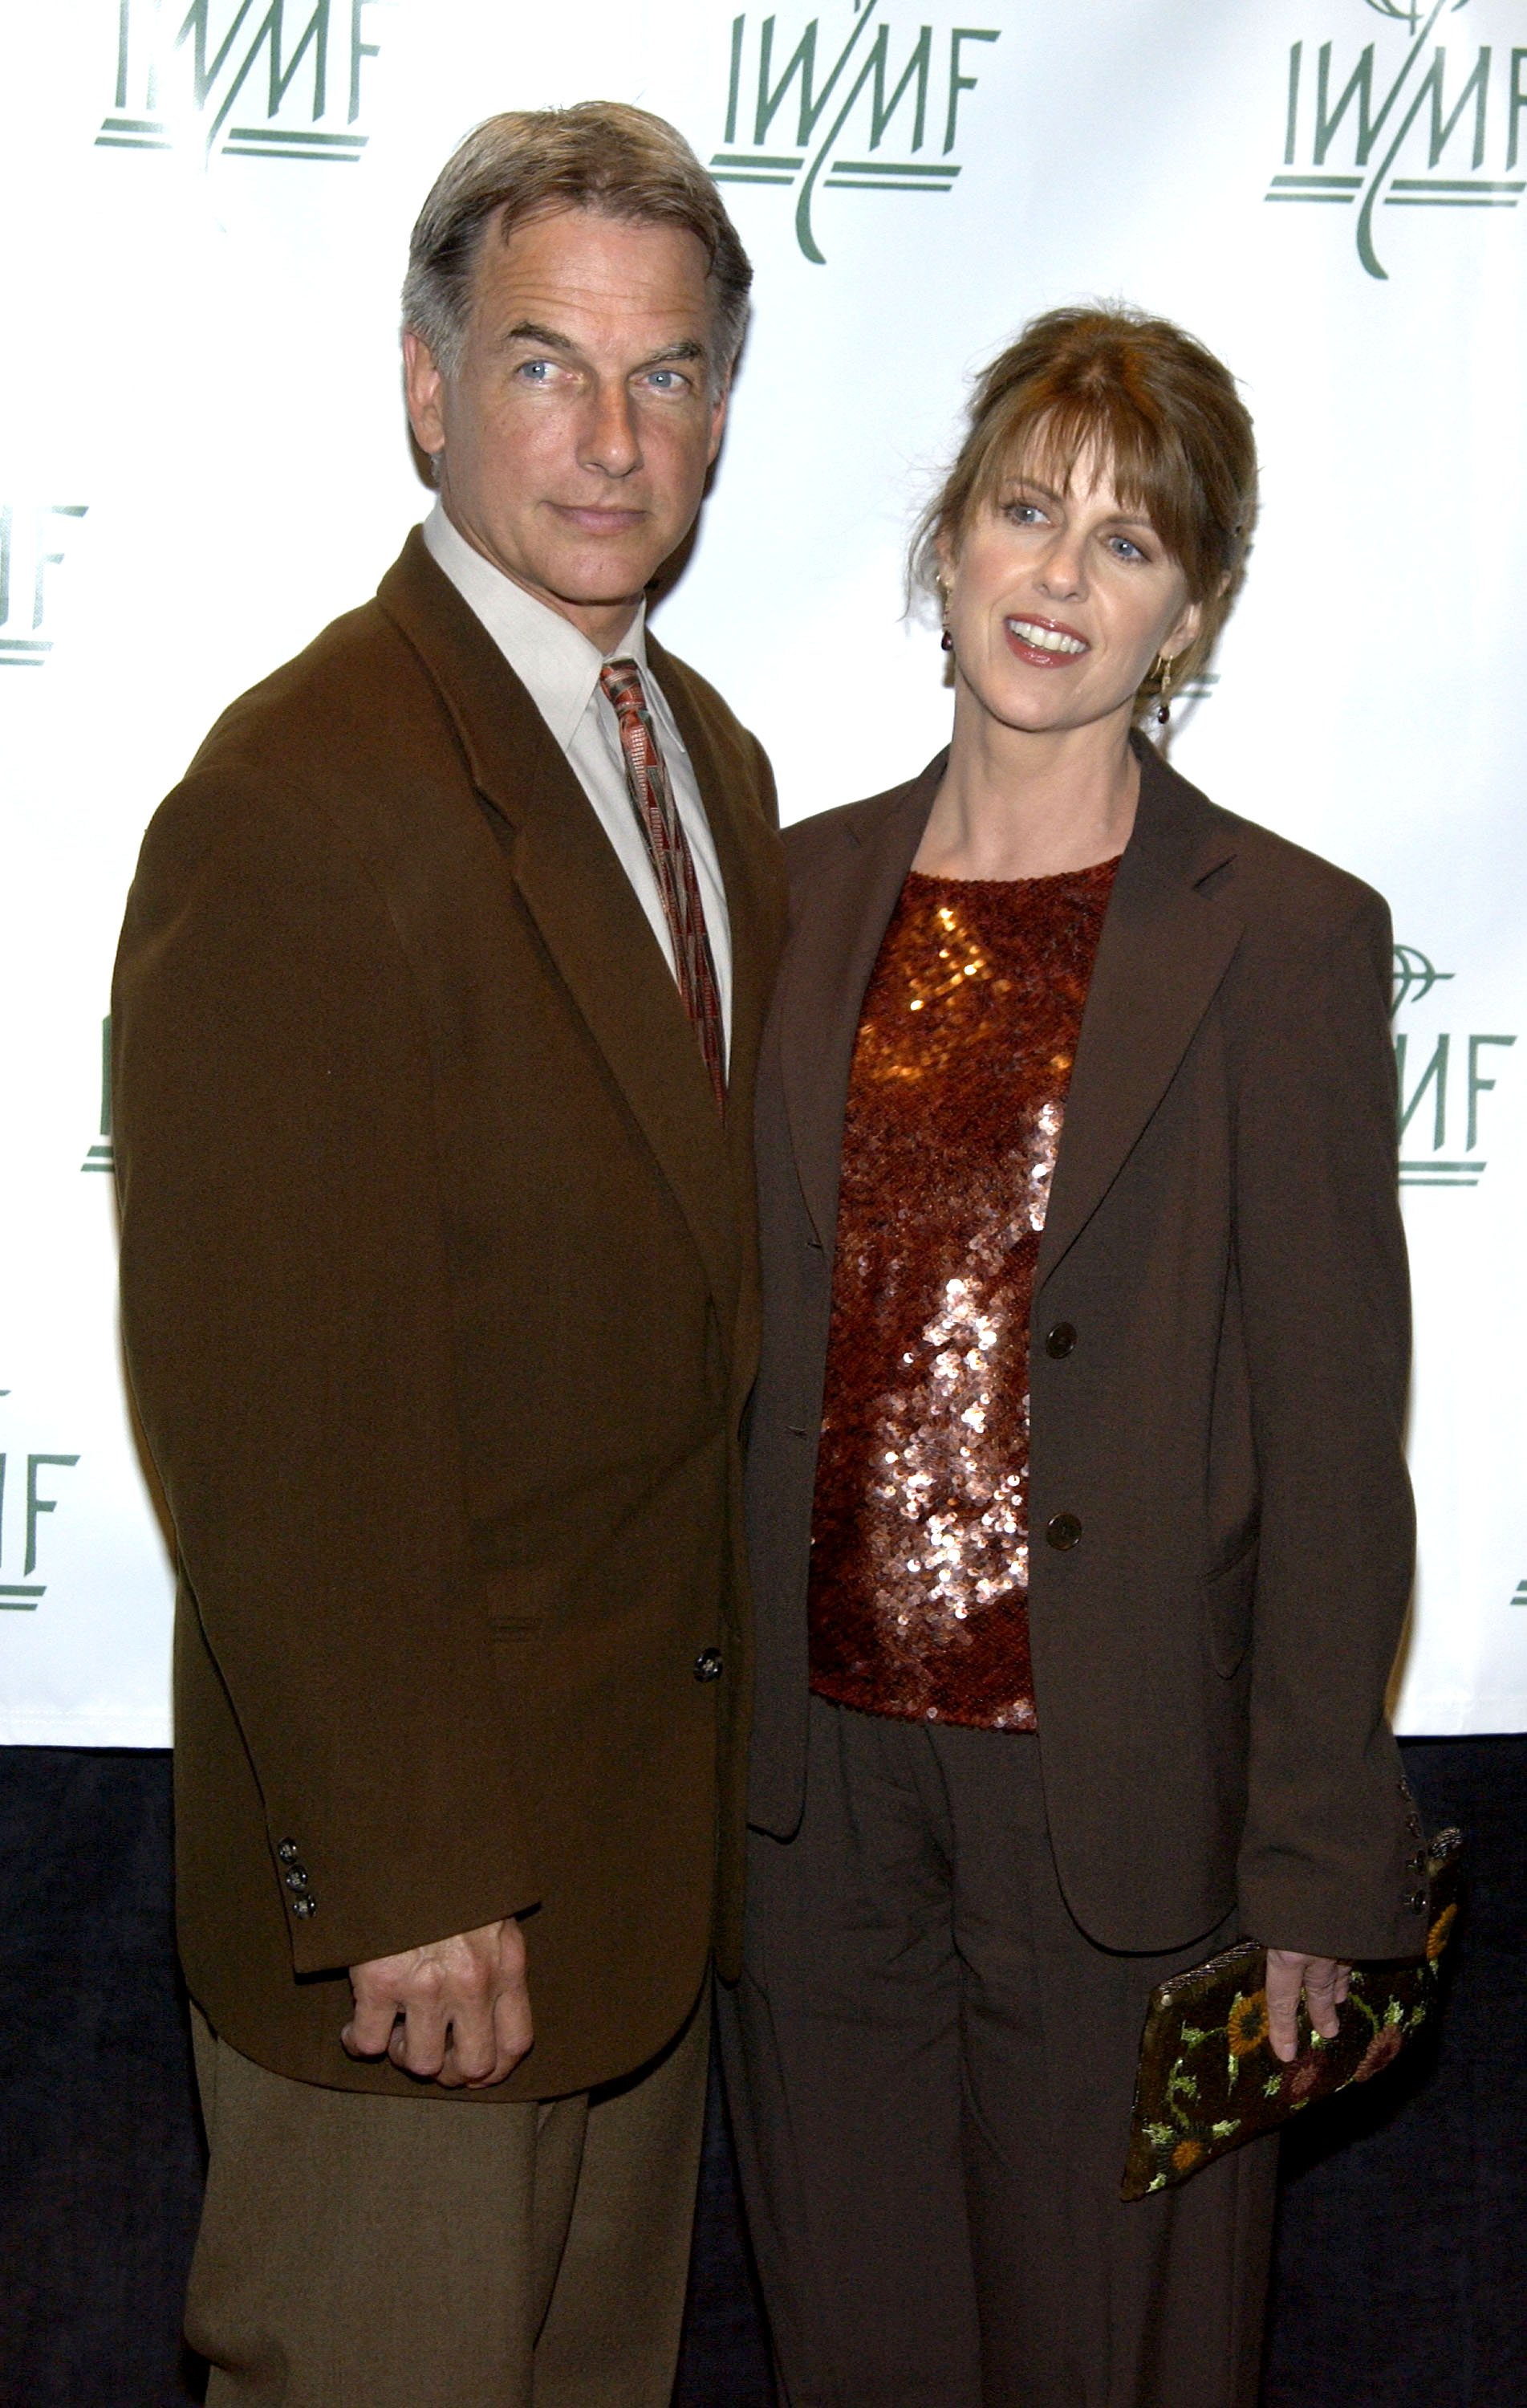 Mark Harmon and his wife Pam Dawber attended the 7th Annual Courage in Journalism Awards sponsored by the International Women's Media Foundation to honor women journalists on October 24, 2002, in Beverly Hills, California. | Source: Getty Images